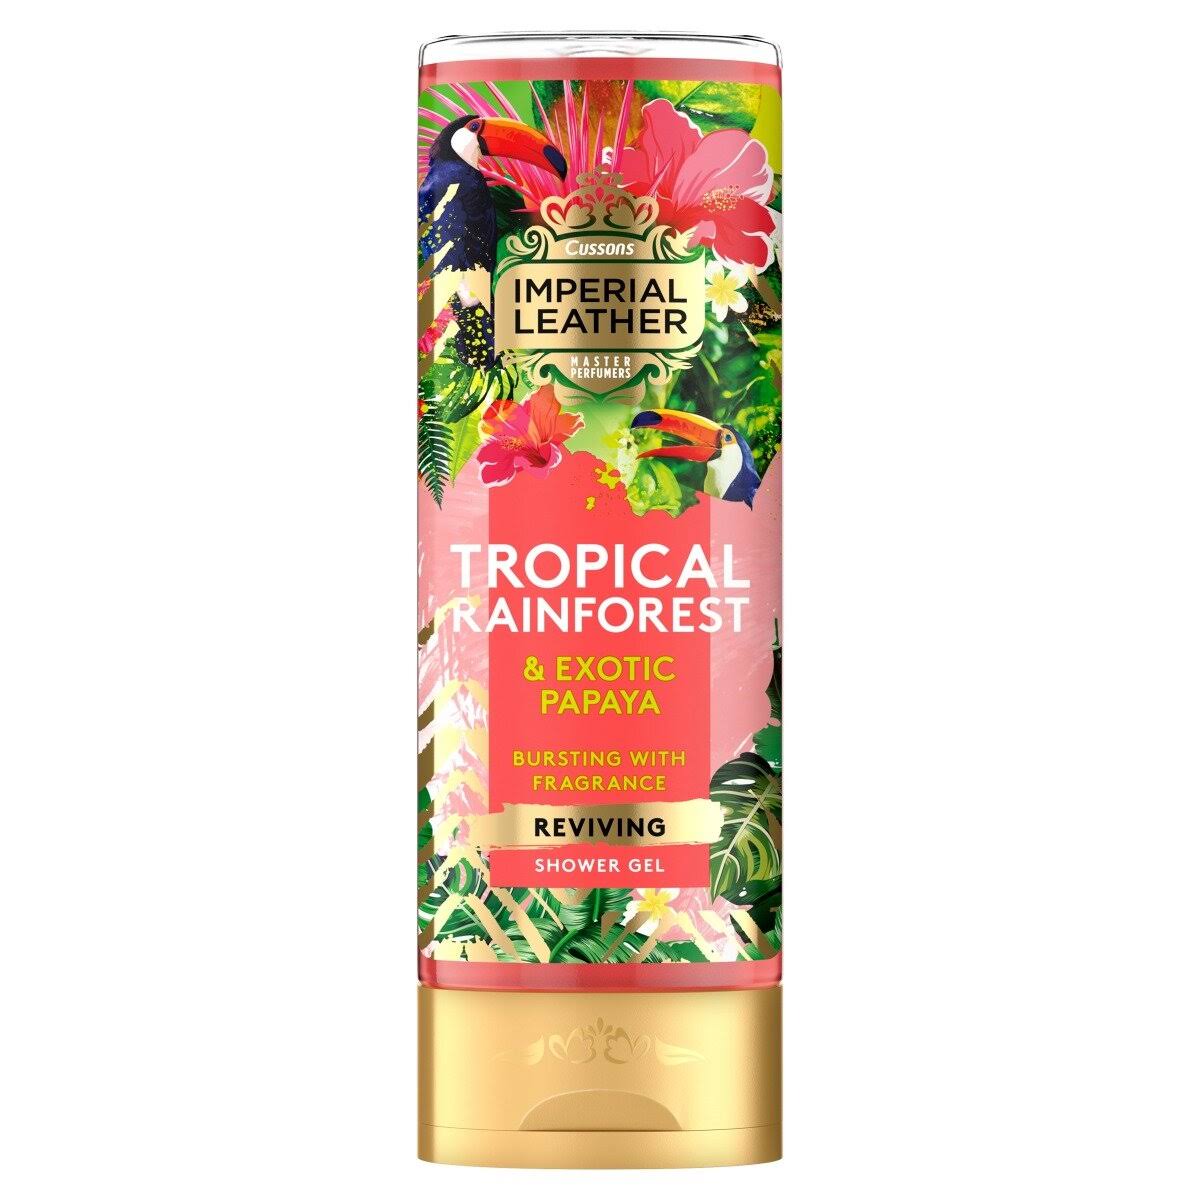 Imperial Leather Tropical Rainforest & Exotic Papaya Shower GEL 500ml